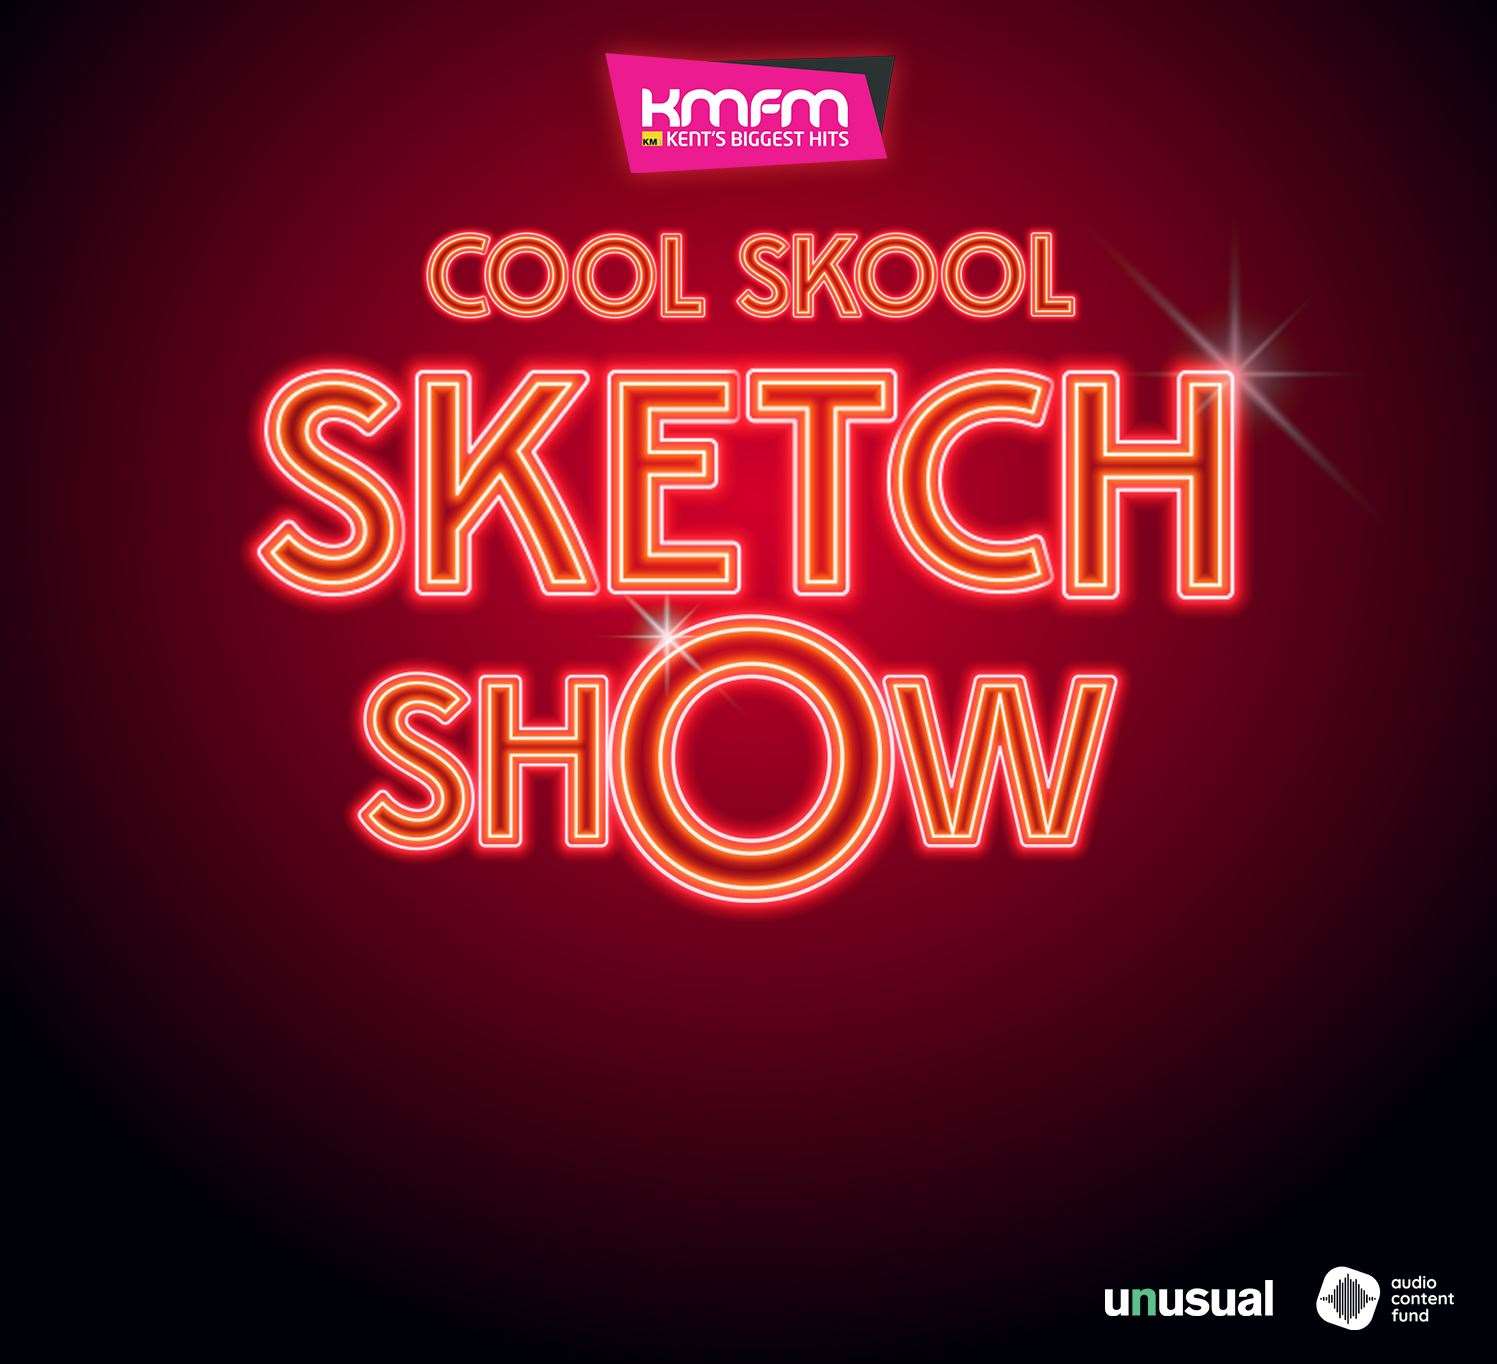 The Cool Skool Sketch Show. Picture: kmfm